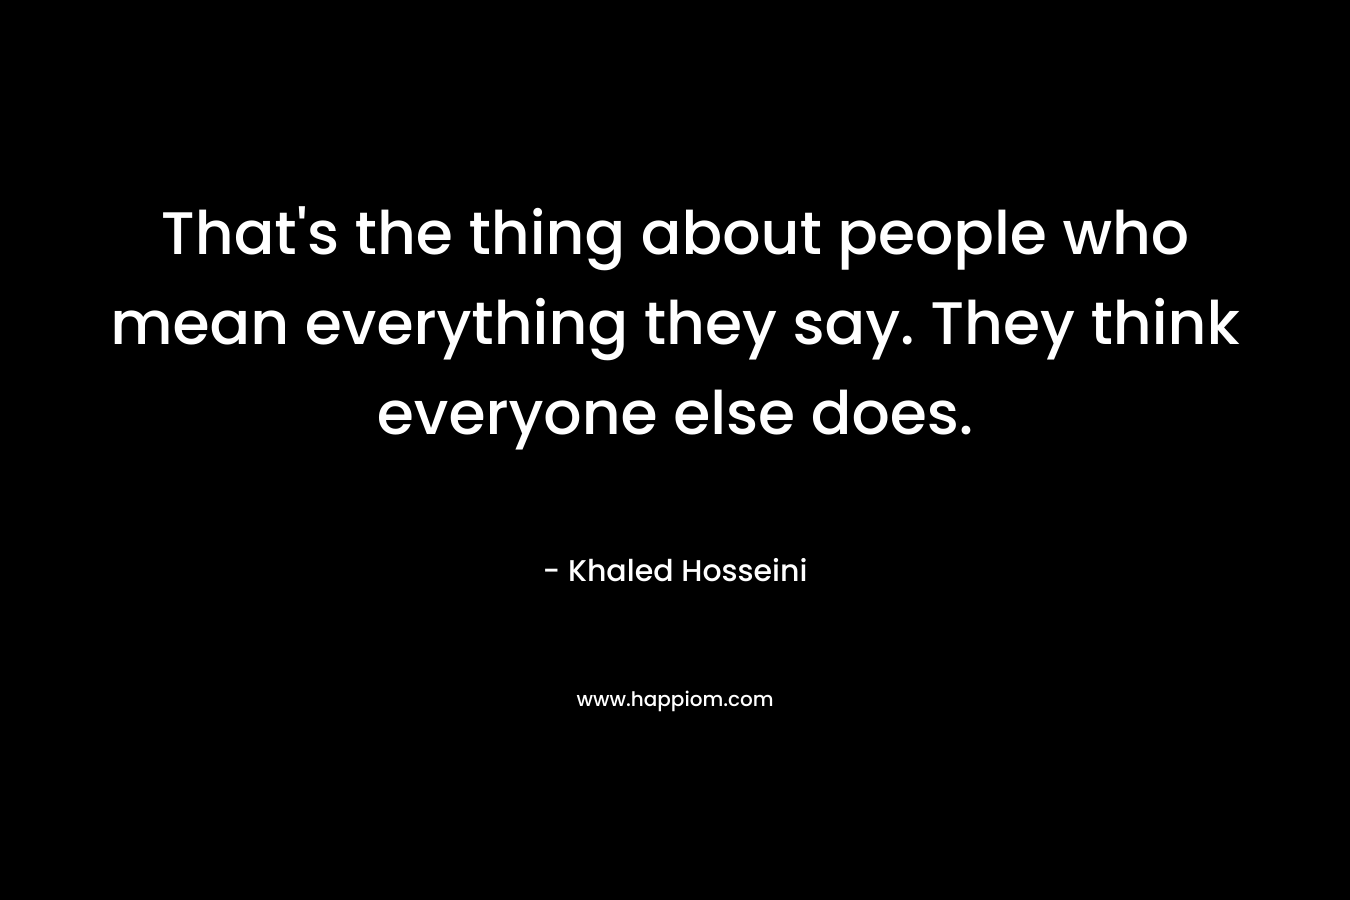 That's the thing about people who mean everything they say. They think everyone else does.